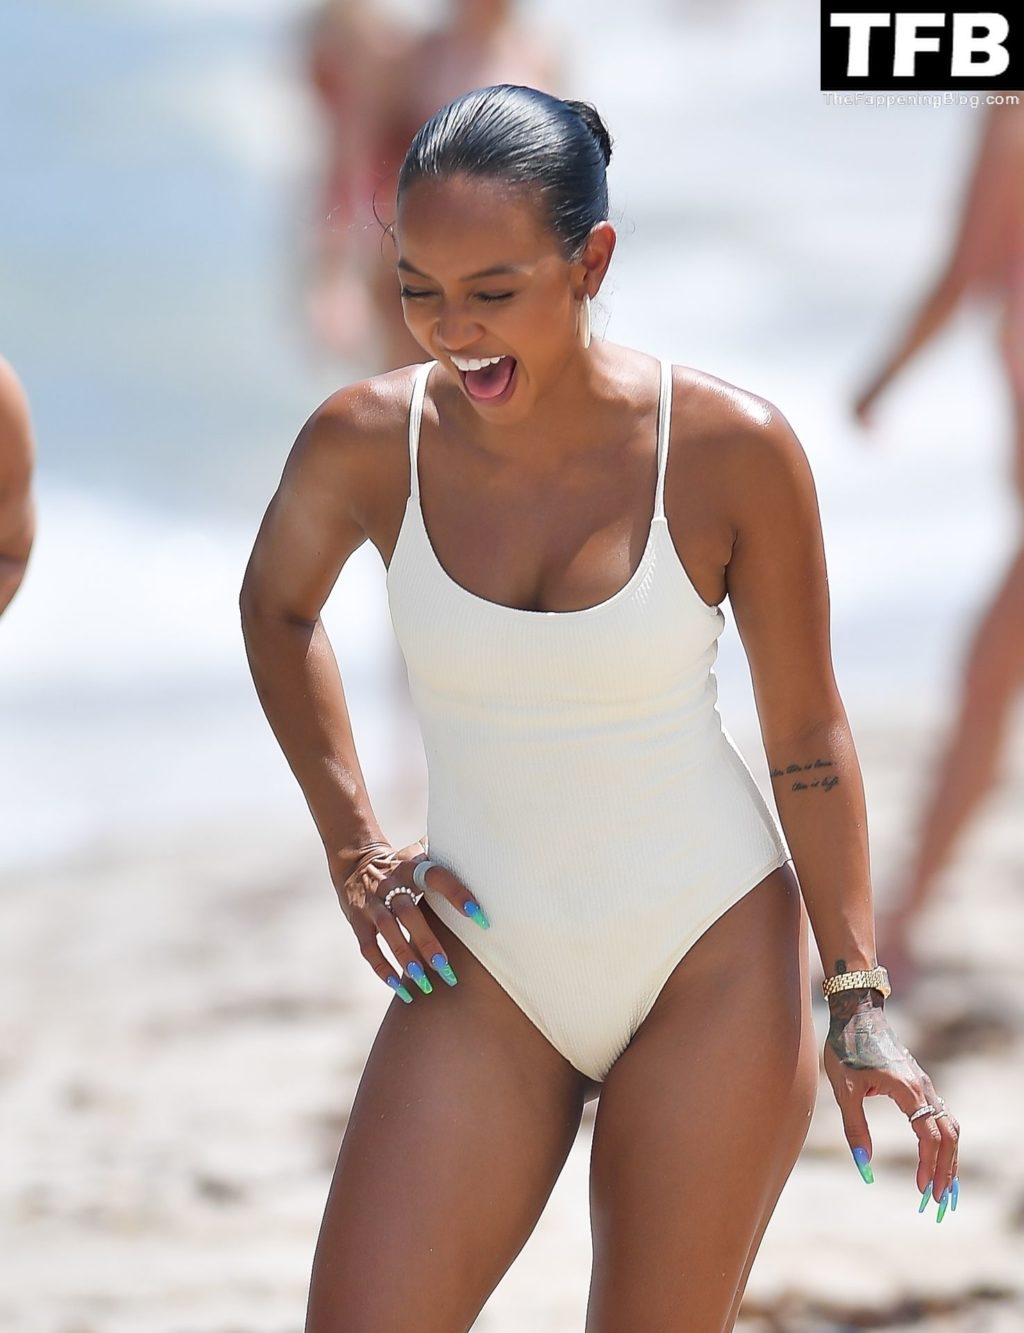 Karrueche Tran Sexy The Fappening Blog 32 1024x1333 - Karrueche Tran Looks Incredible in a White Swimsuit on the Beach in Miami (45 Photos)